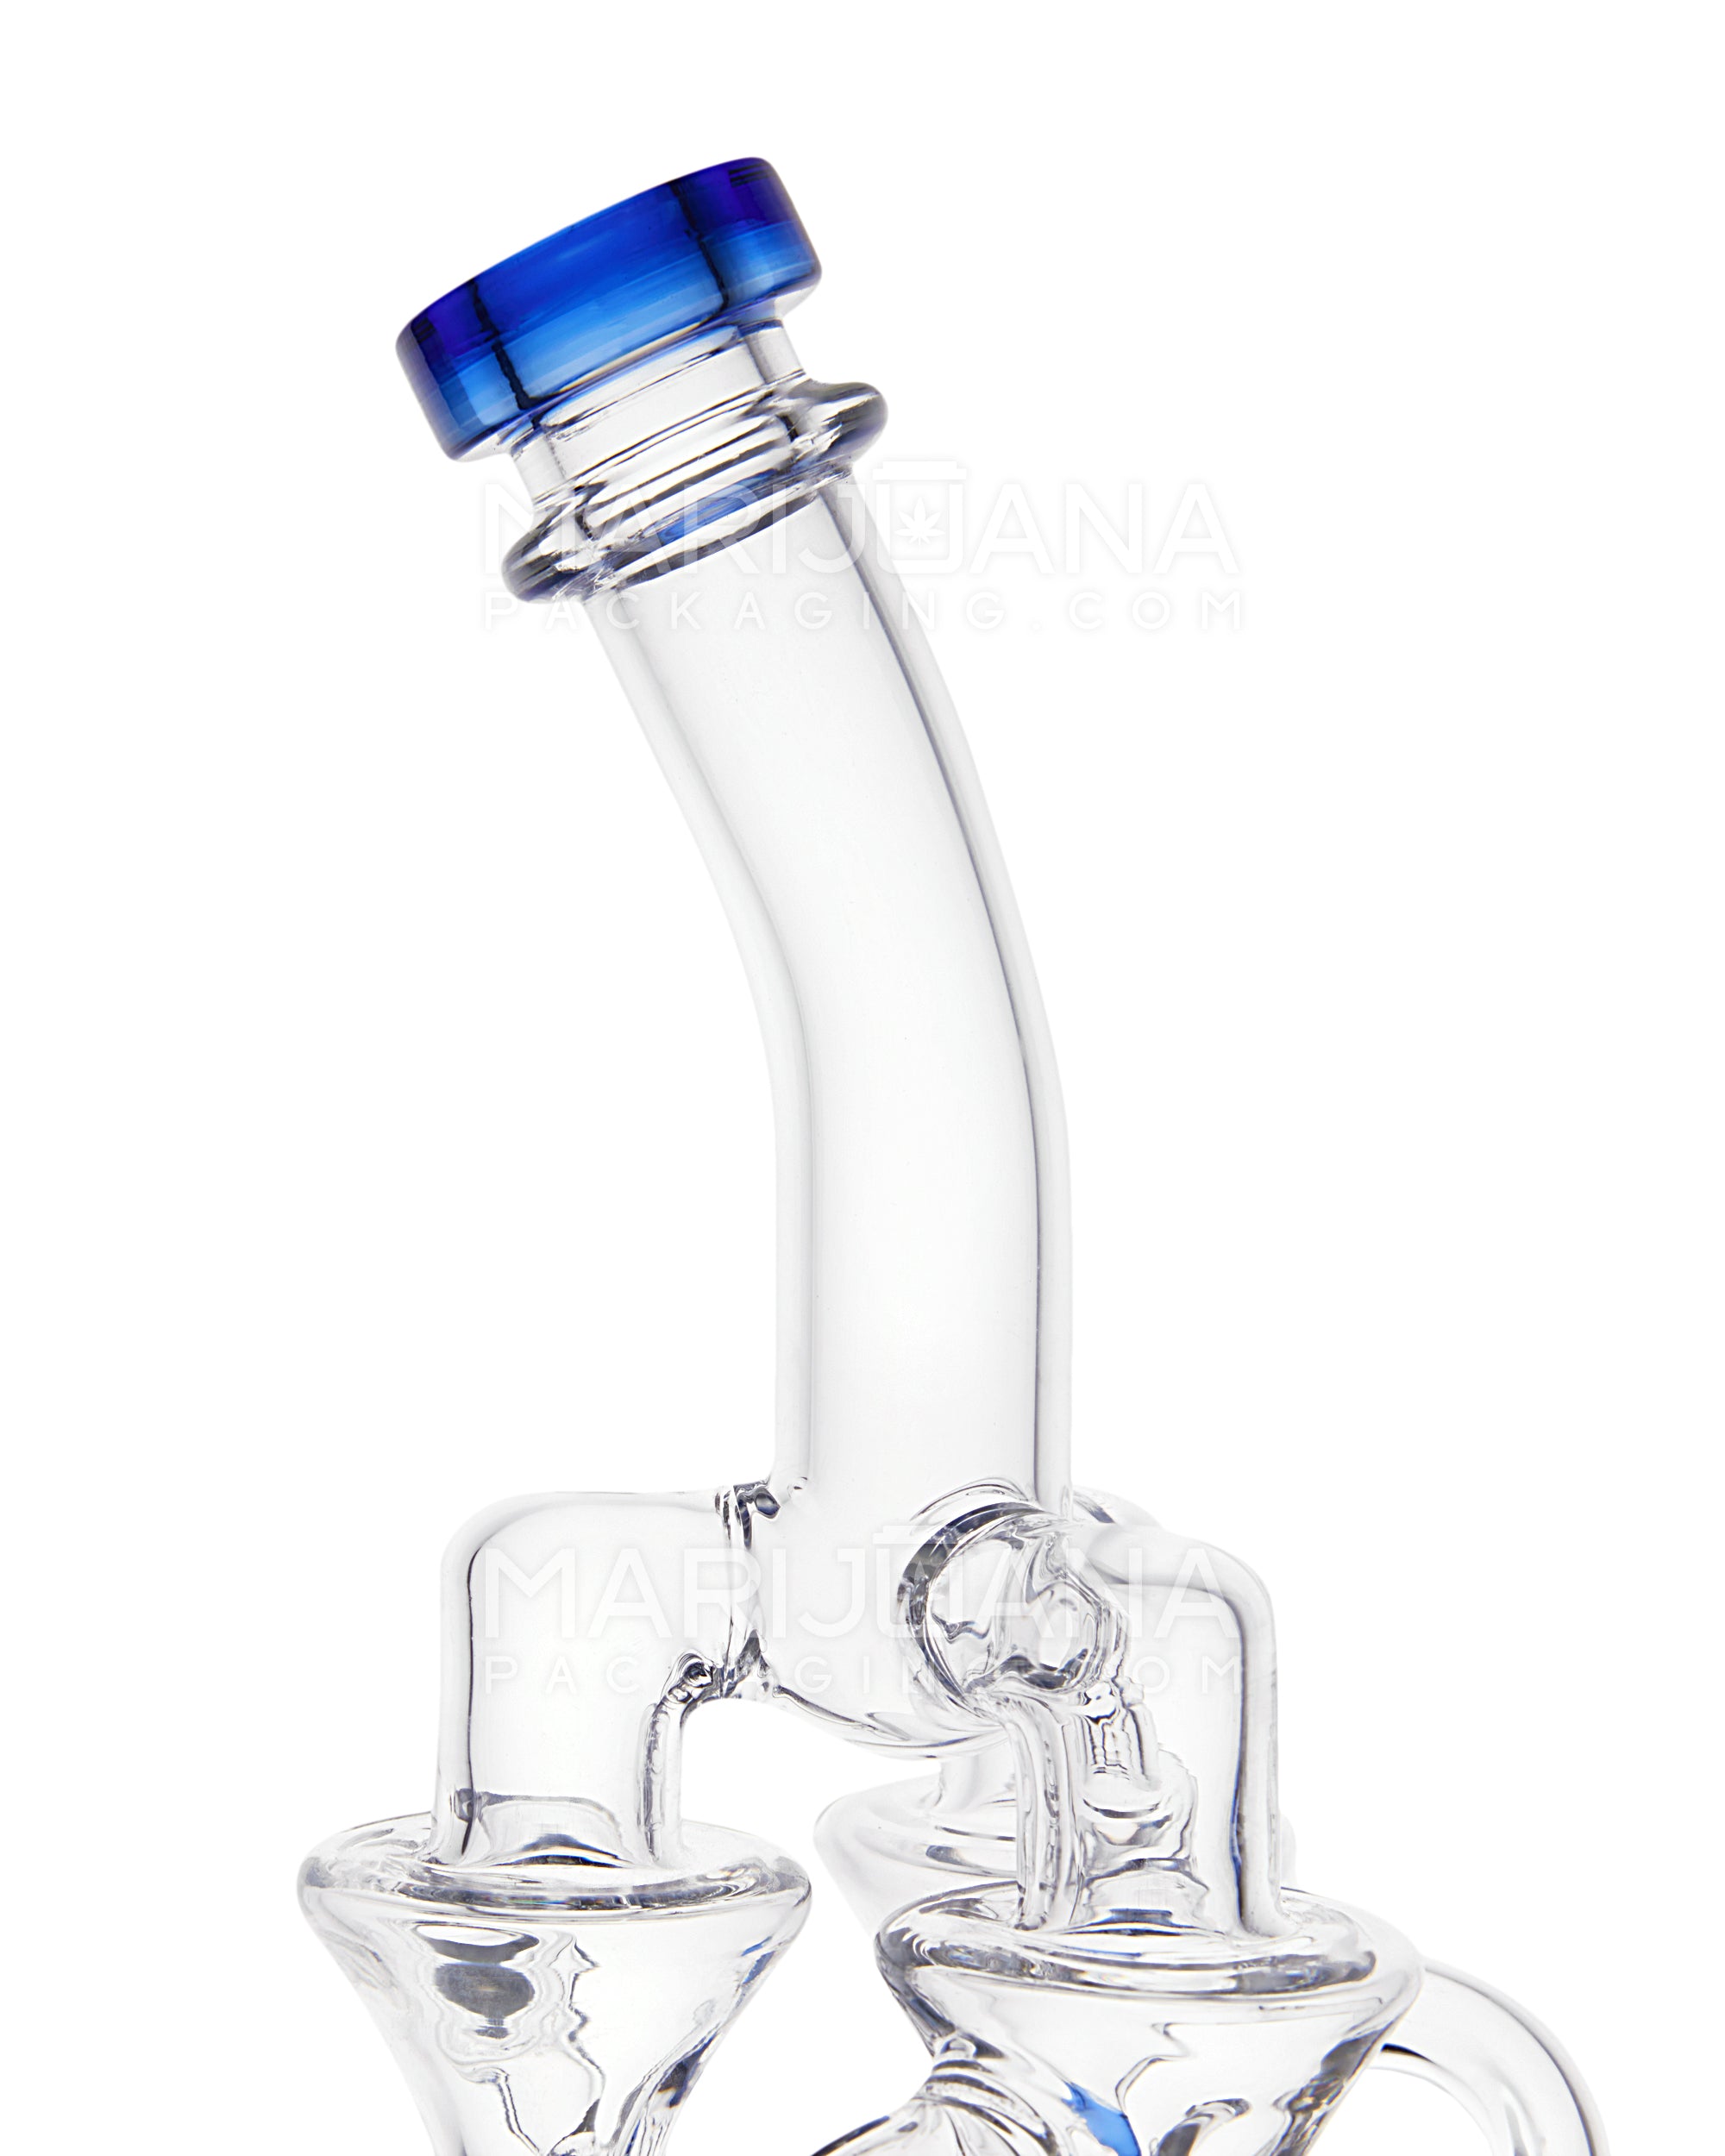 USA Glass | Bent Neck Inline Perc Six Recycler Pillar Tower Water Pipe w/ Thick Base | 14.5in Tall - 14mm Bowl - Blue - 3